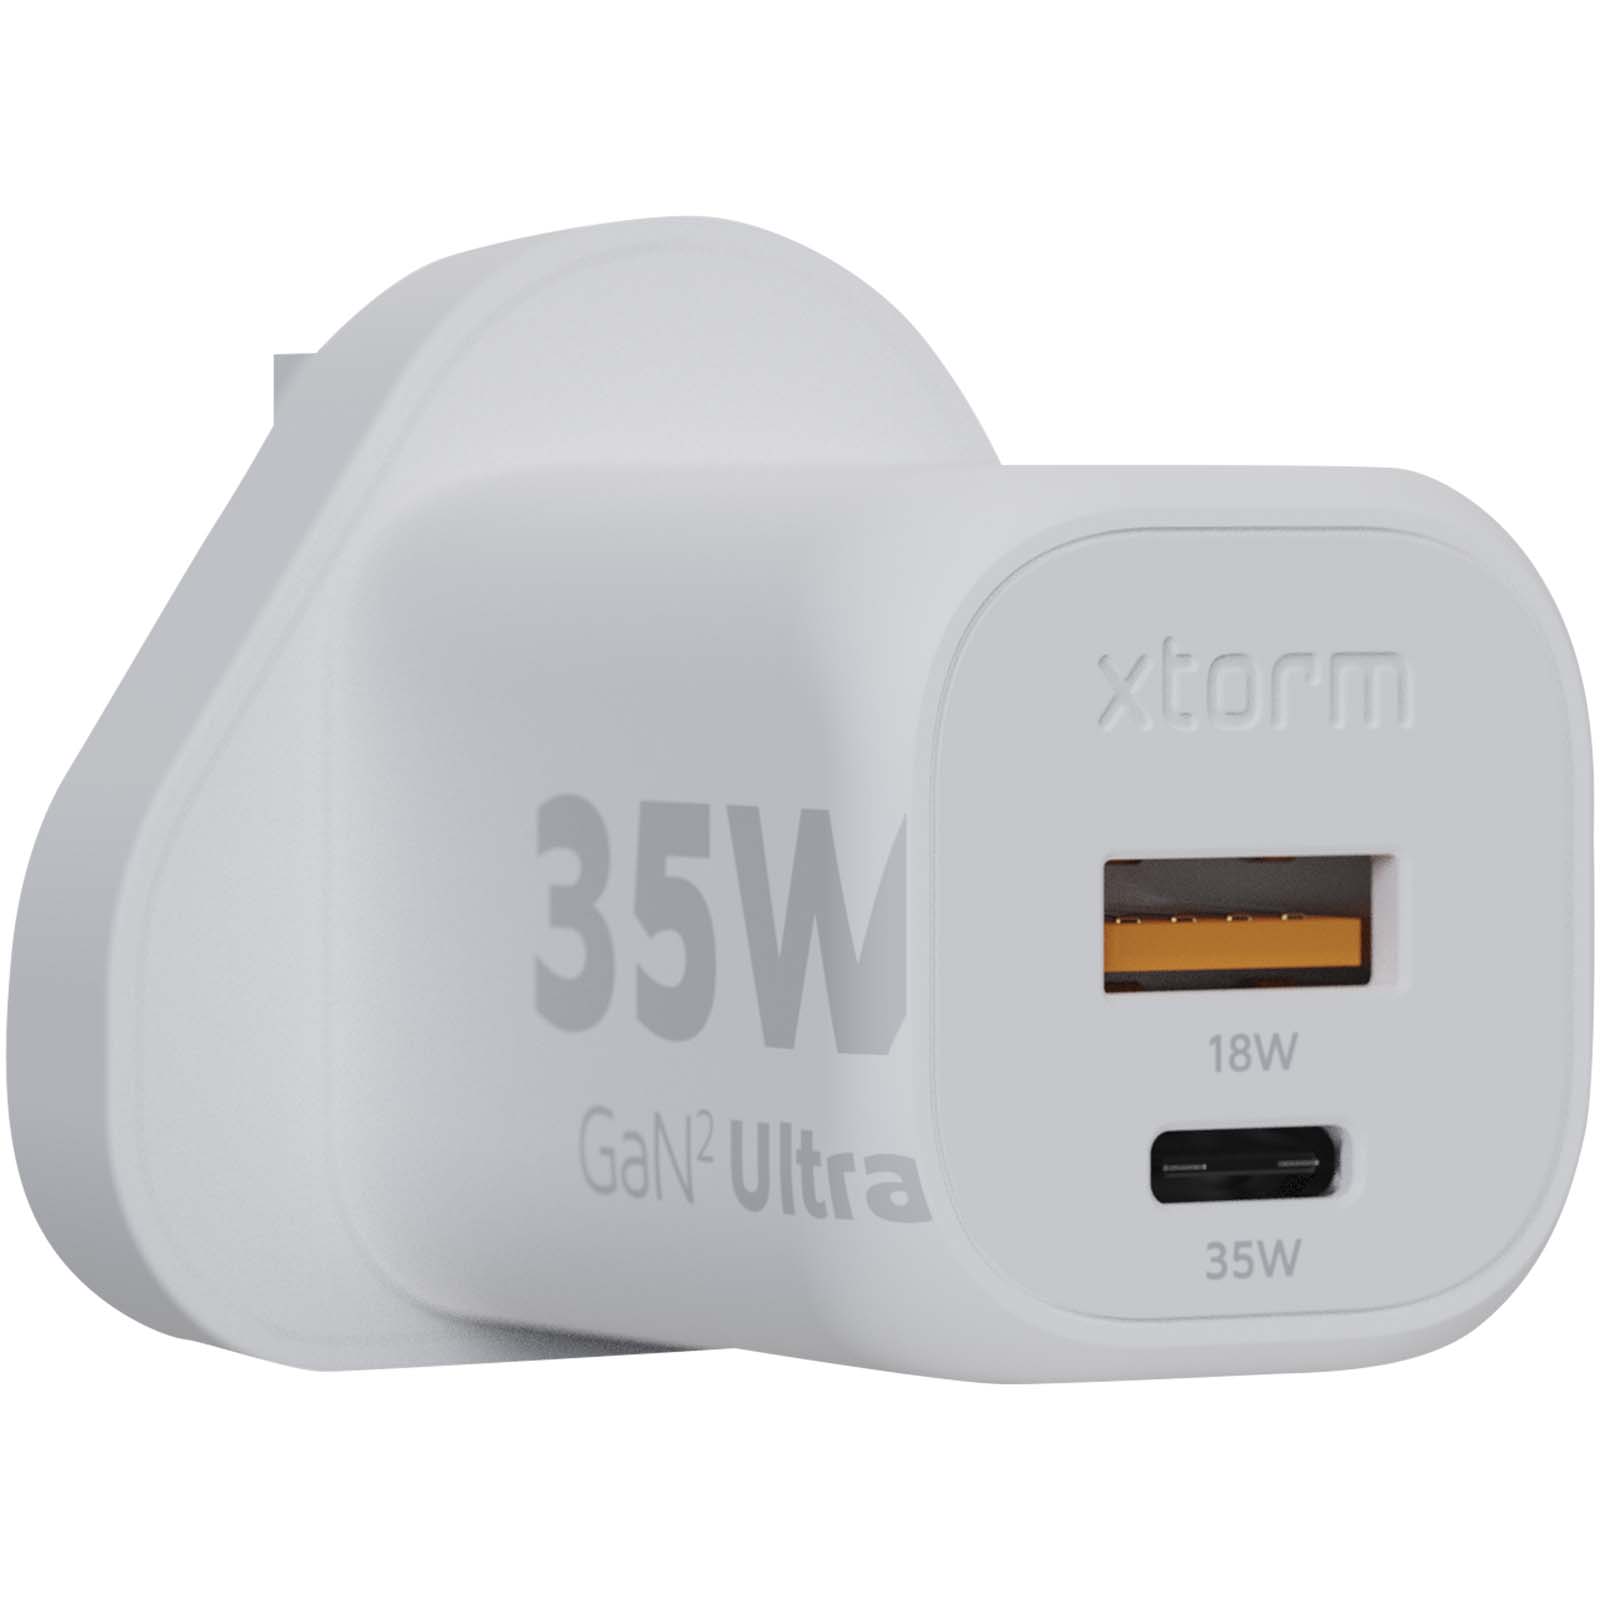 Advertising Chargers - Xtorm XEC035 GaN² Ultra 35W wall charger - UK plug - 4